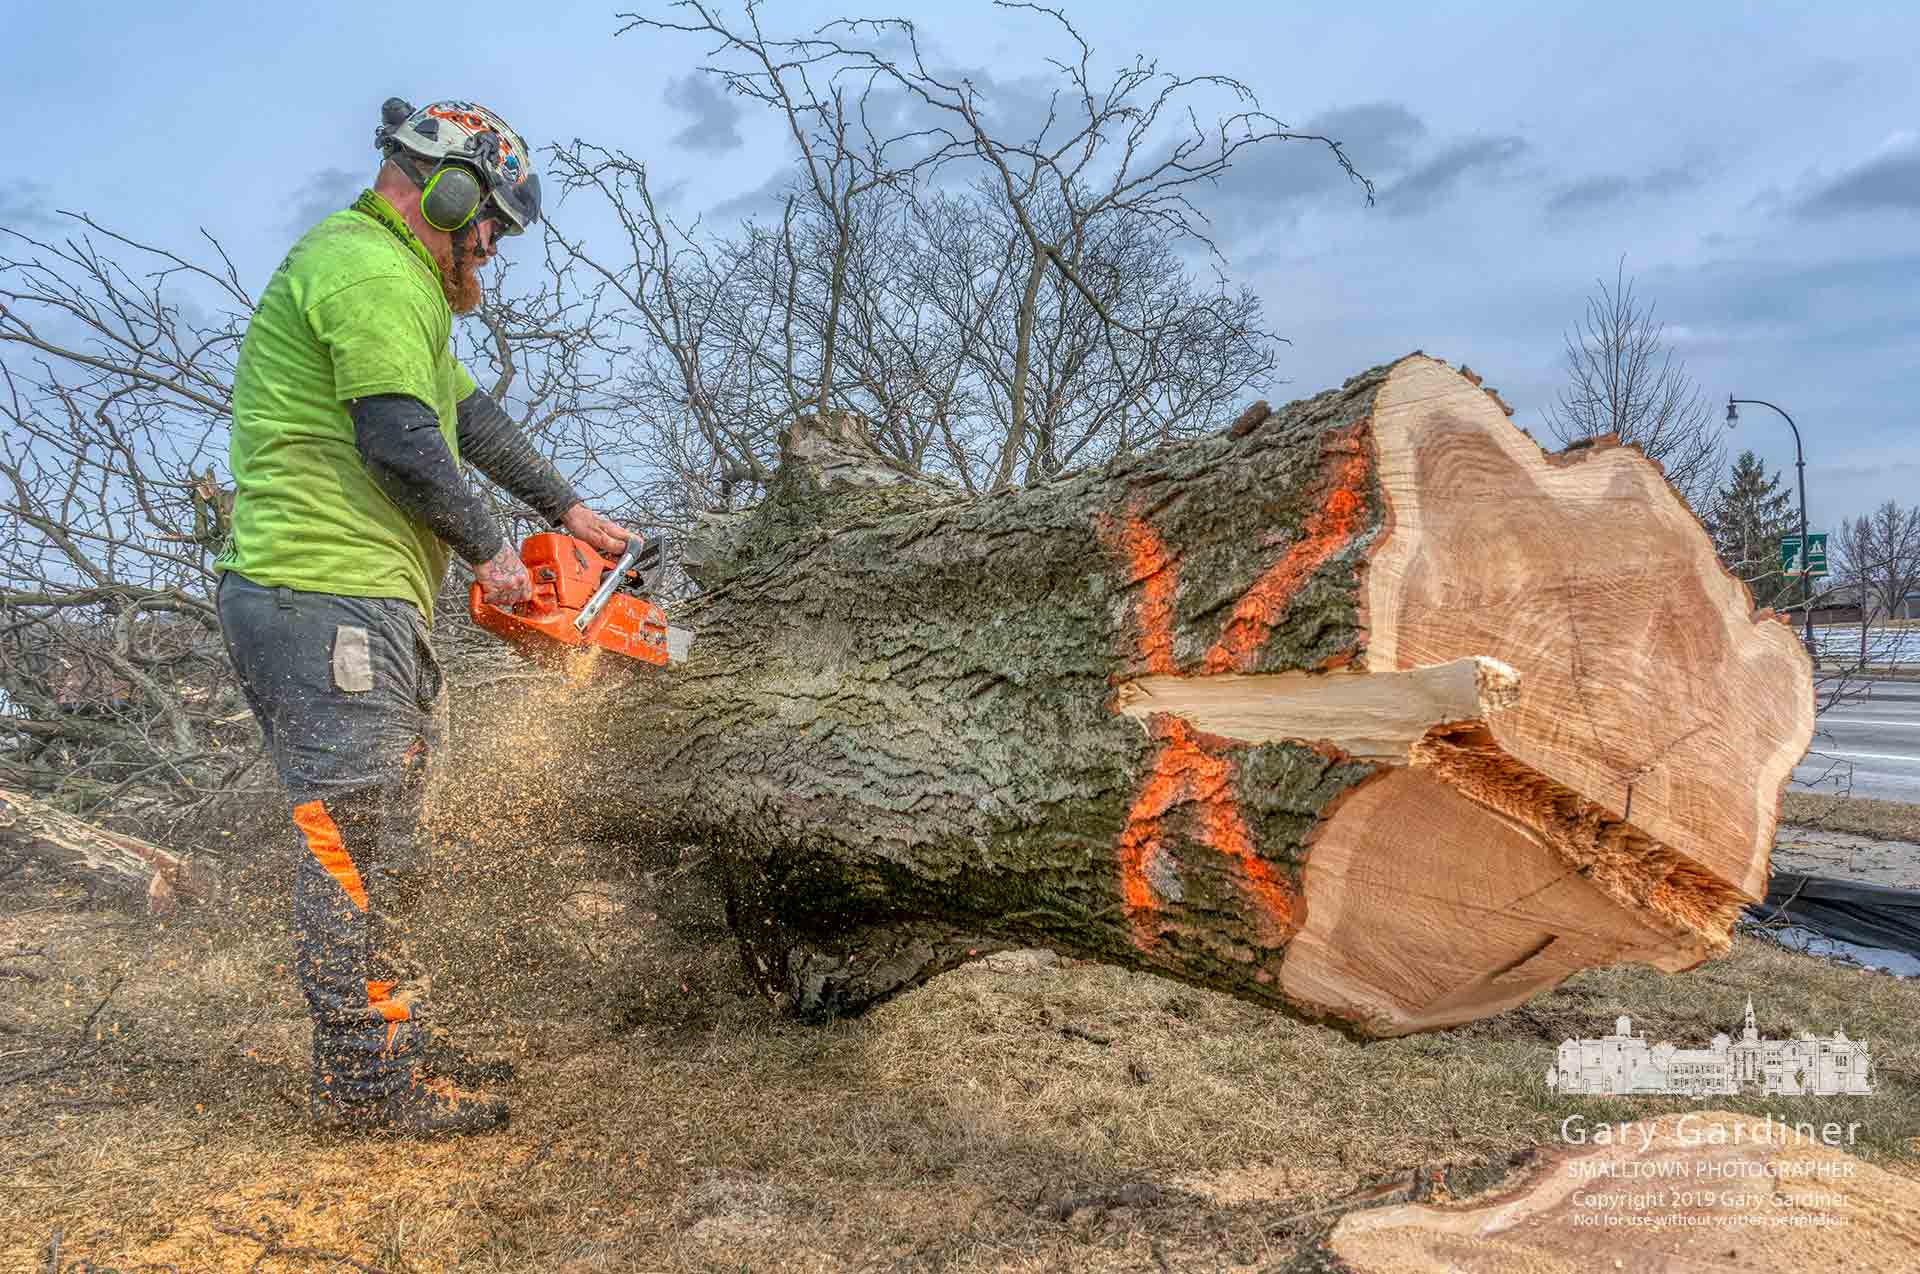 An arborist sections one of five honey locust trees after it was cut to make way for a parking lot for the New First Watch restaurant at State Street and Huber Village Boulevard. My Final Photo for March 7, 2019.